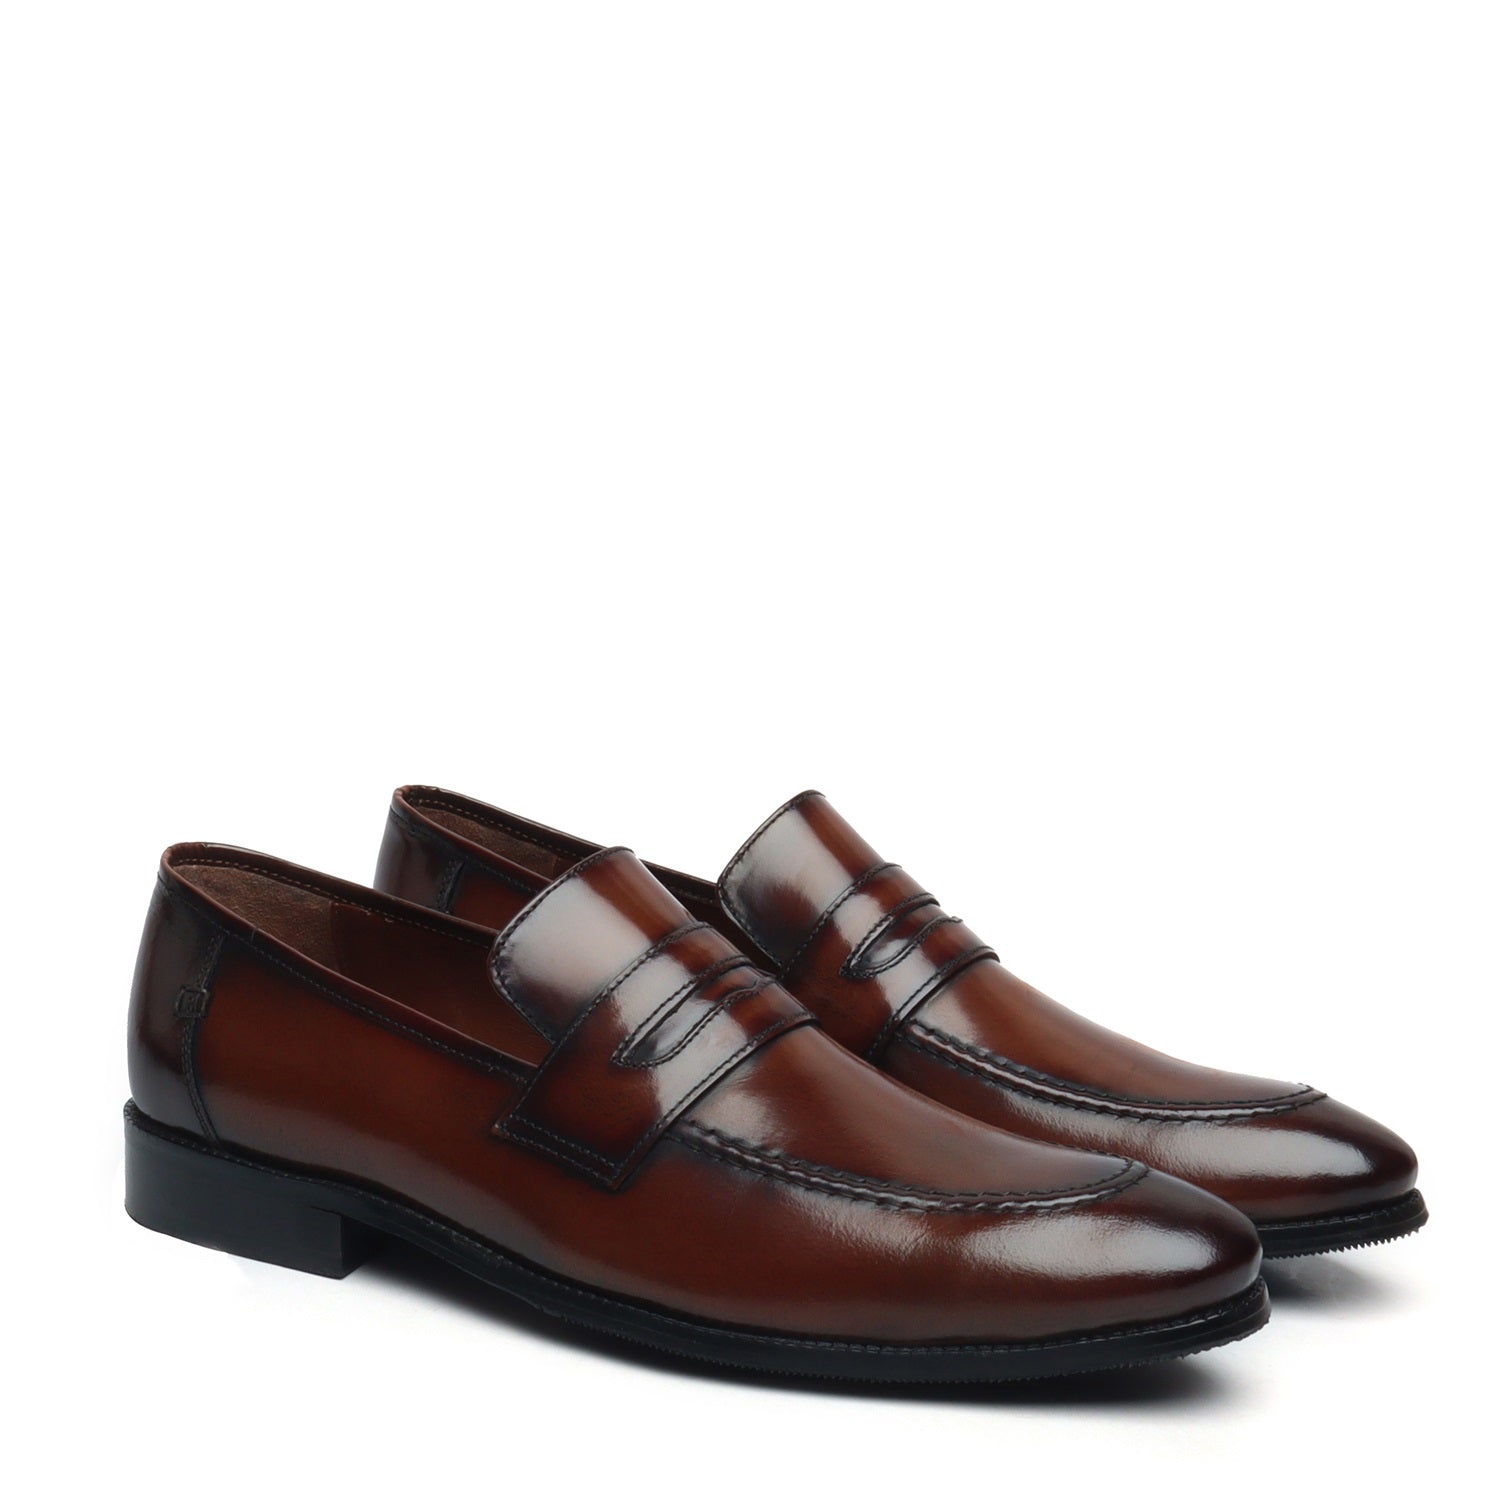 Brush Off Penny Loafers in Genuine Dark Brown Leather